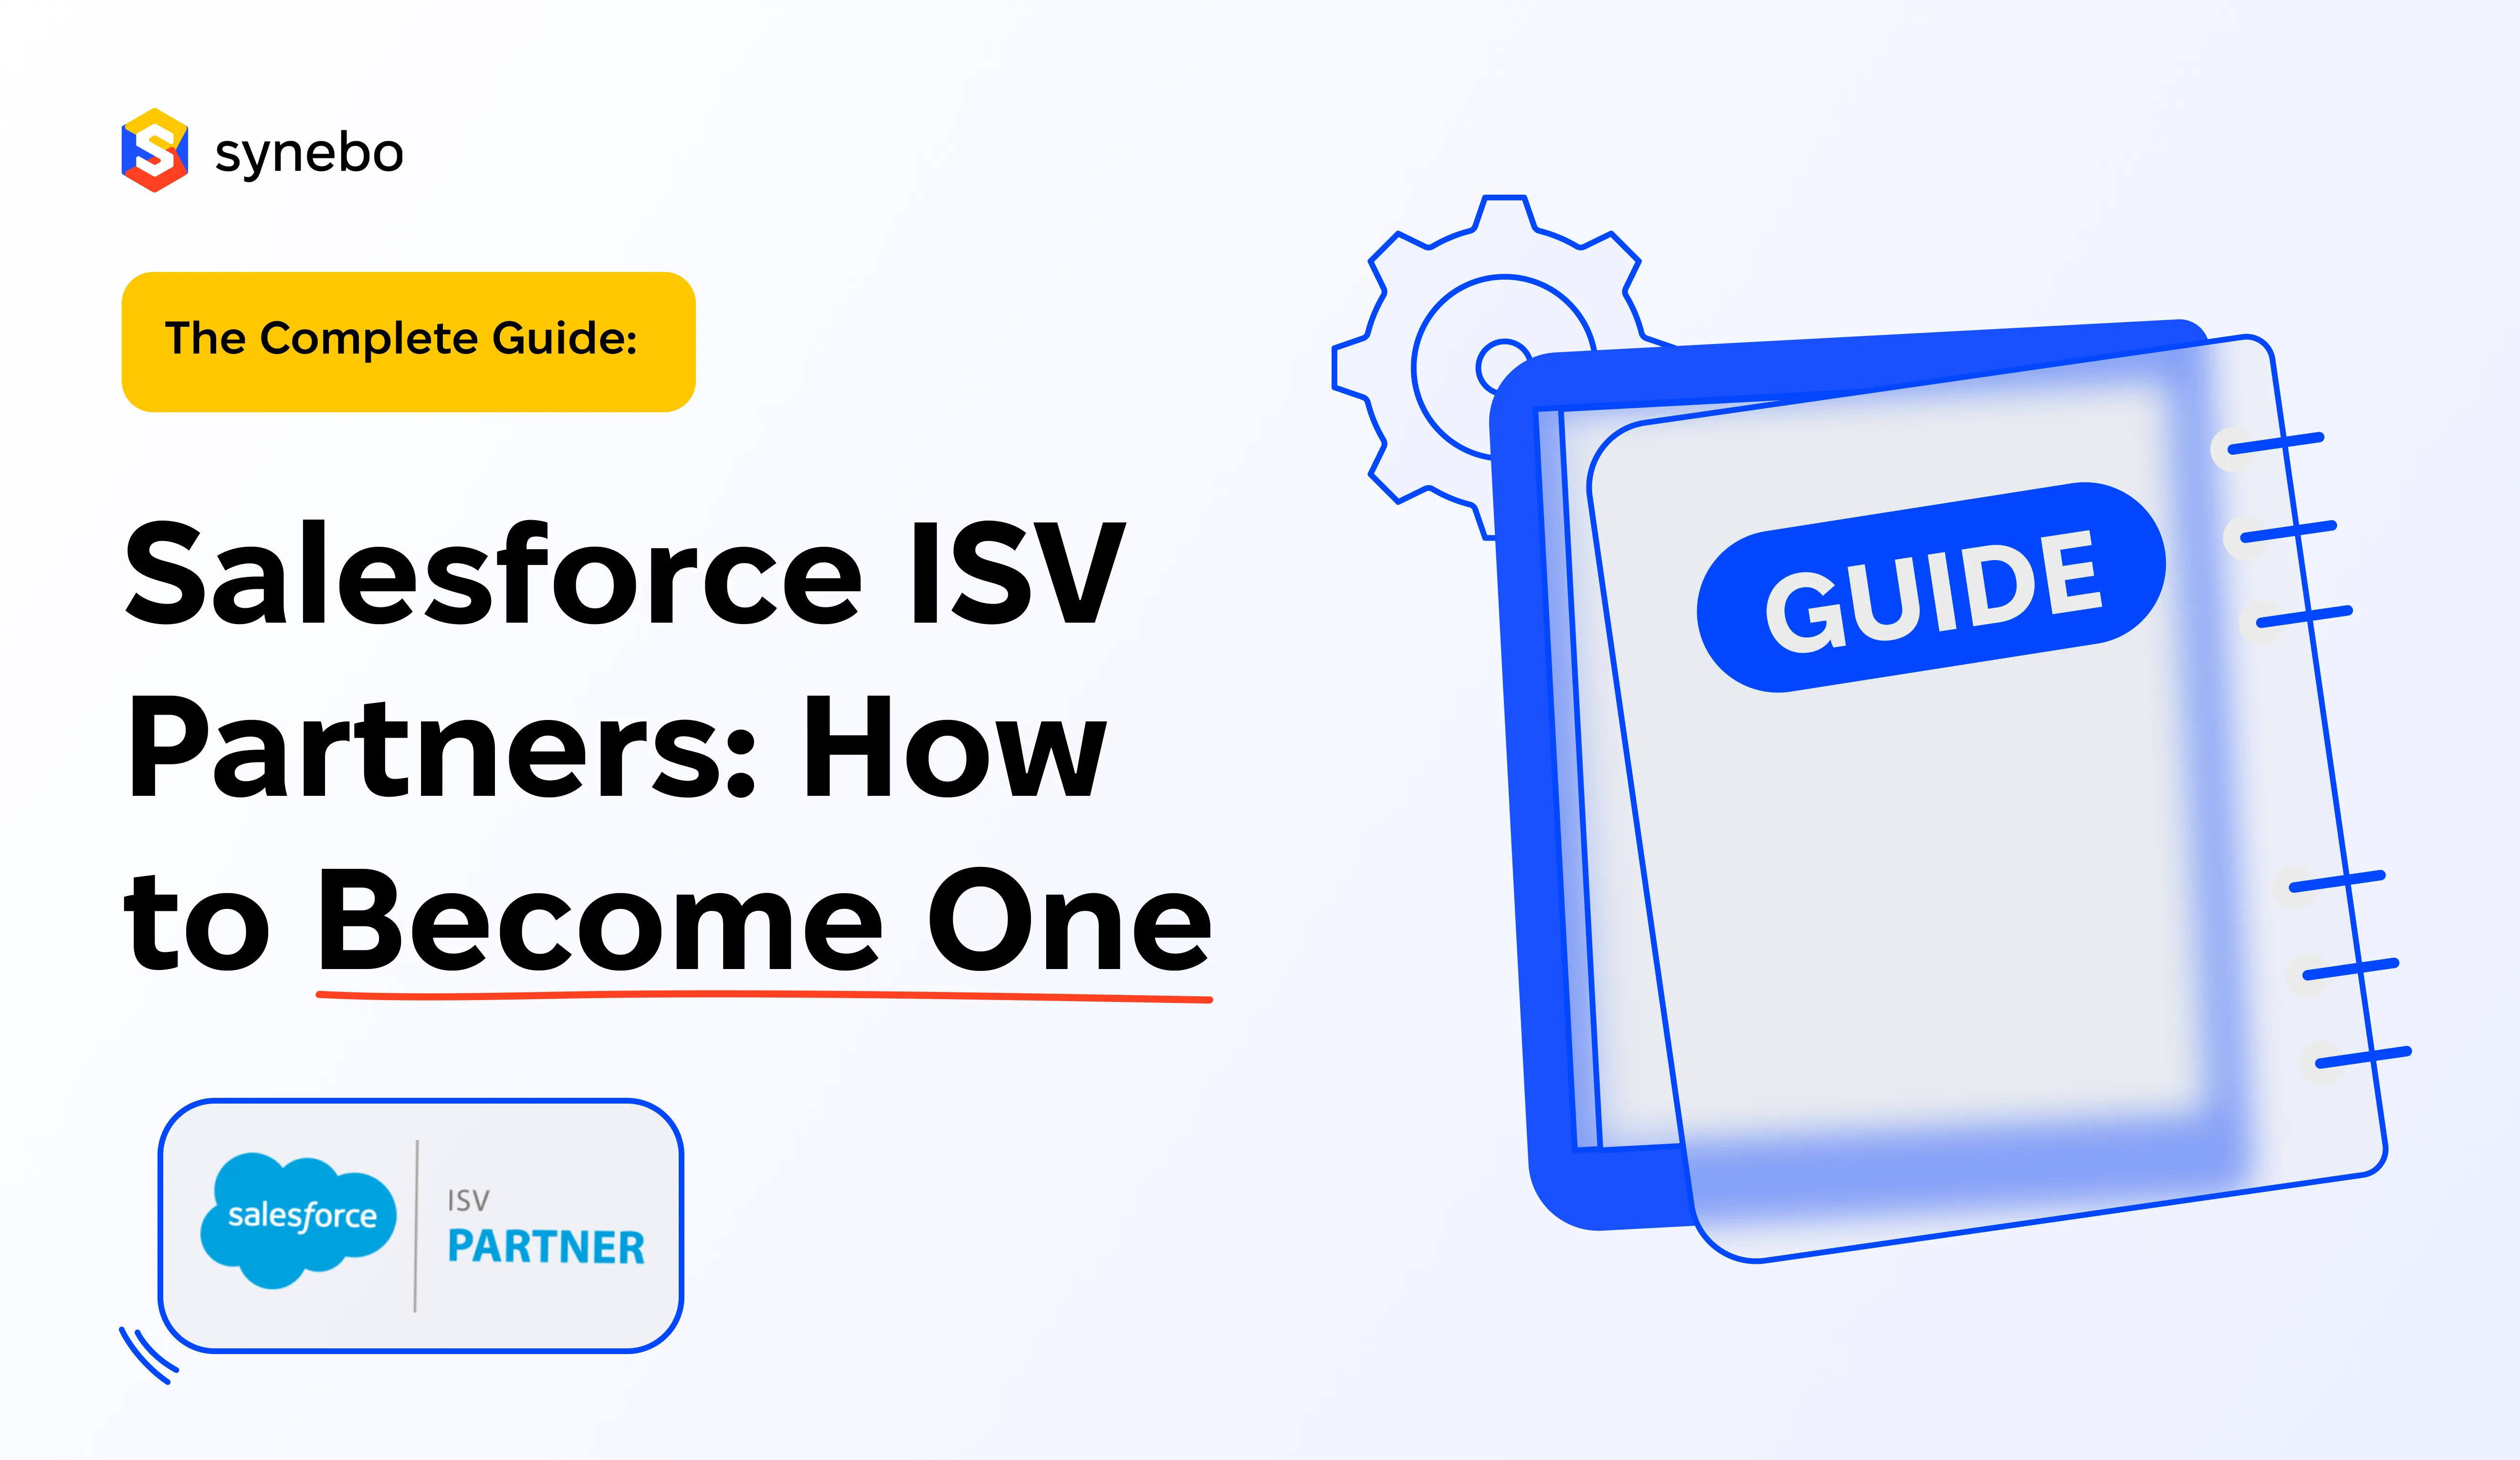 The complete guide to Salesforce ISV partners